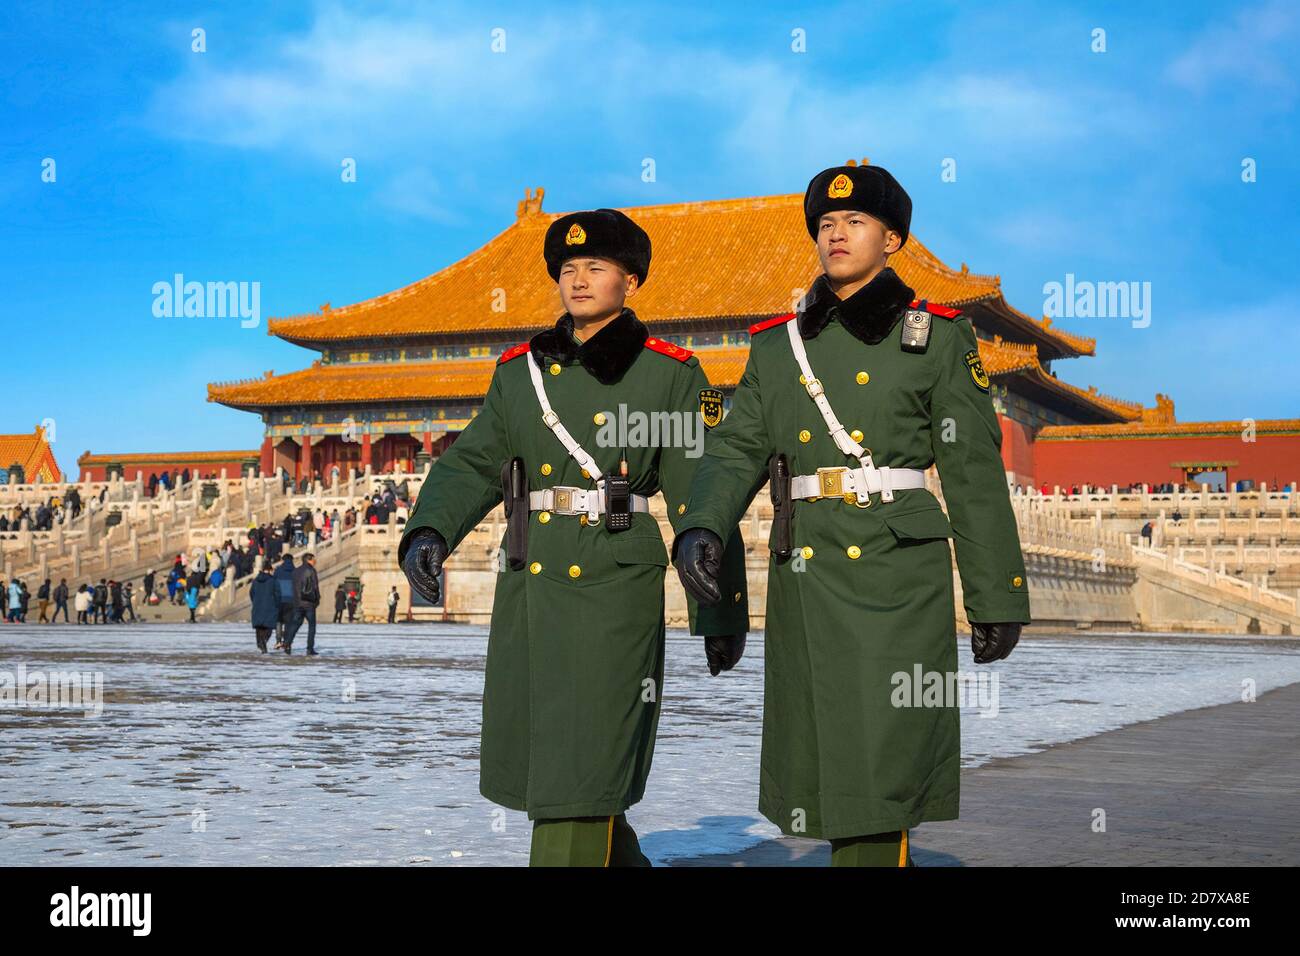 Beijing, China - Jan 9 2020: Unidentified Chinese military guards patrol on the courtyard of Taihedian (Hall of Supreme Harmony) in the Forbidden City Stock Photo